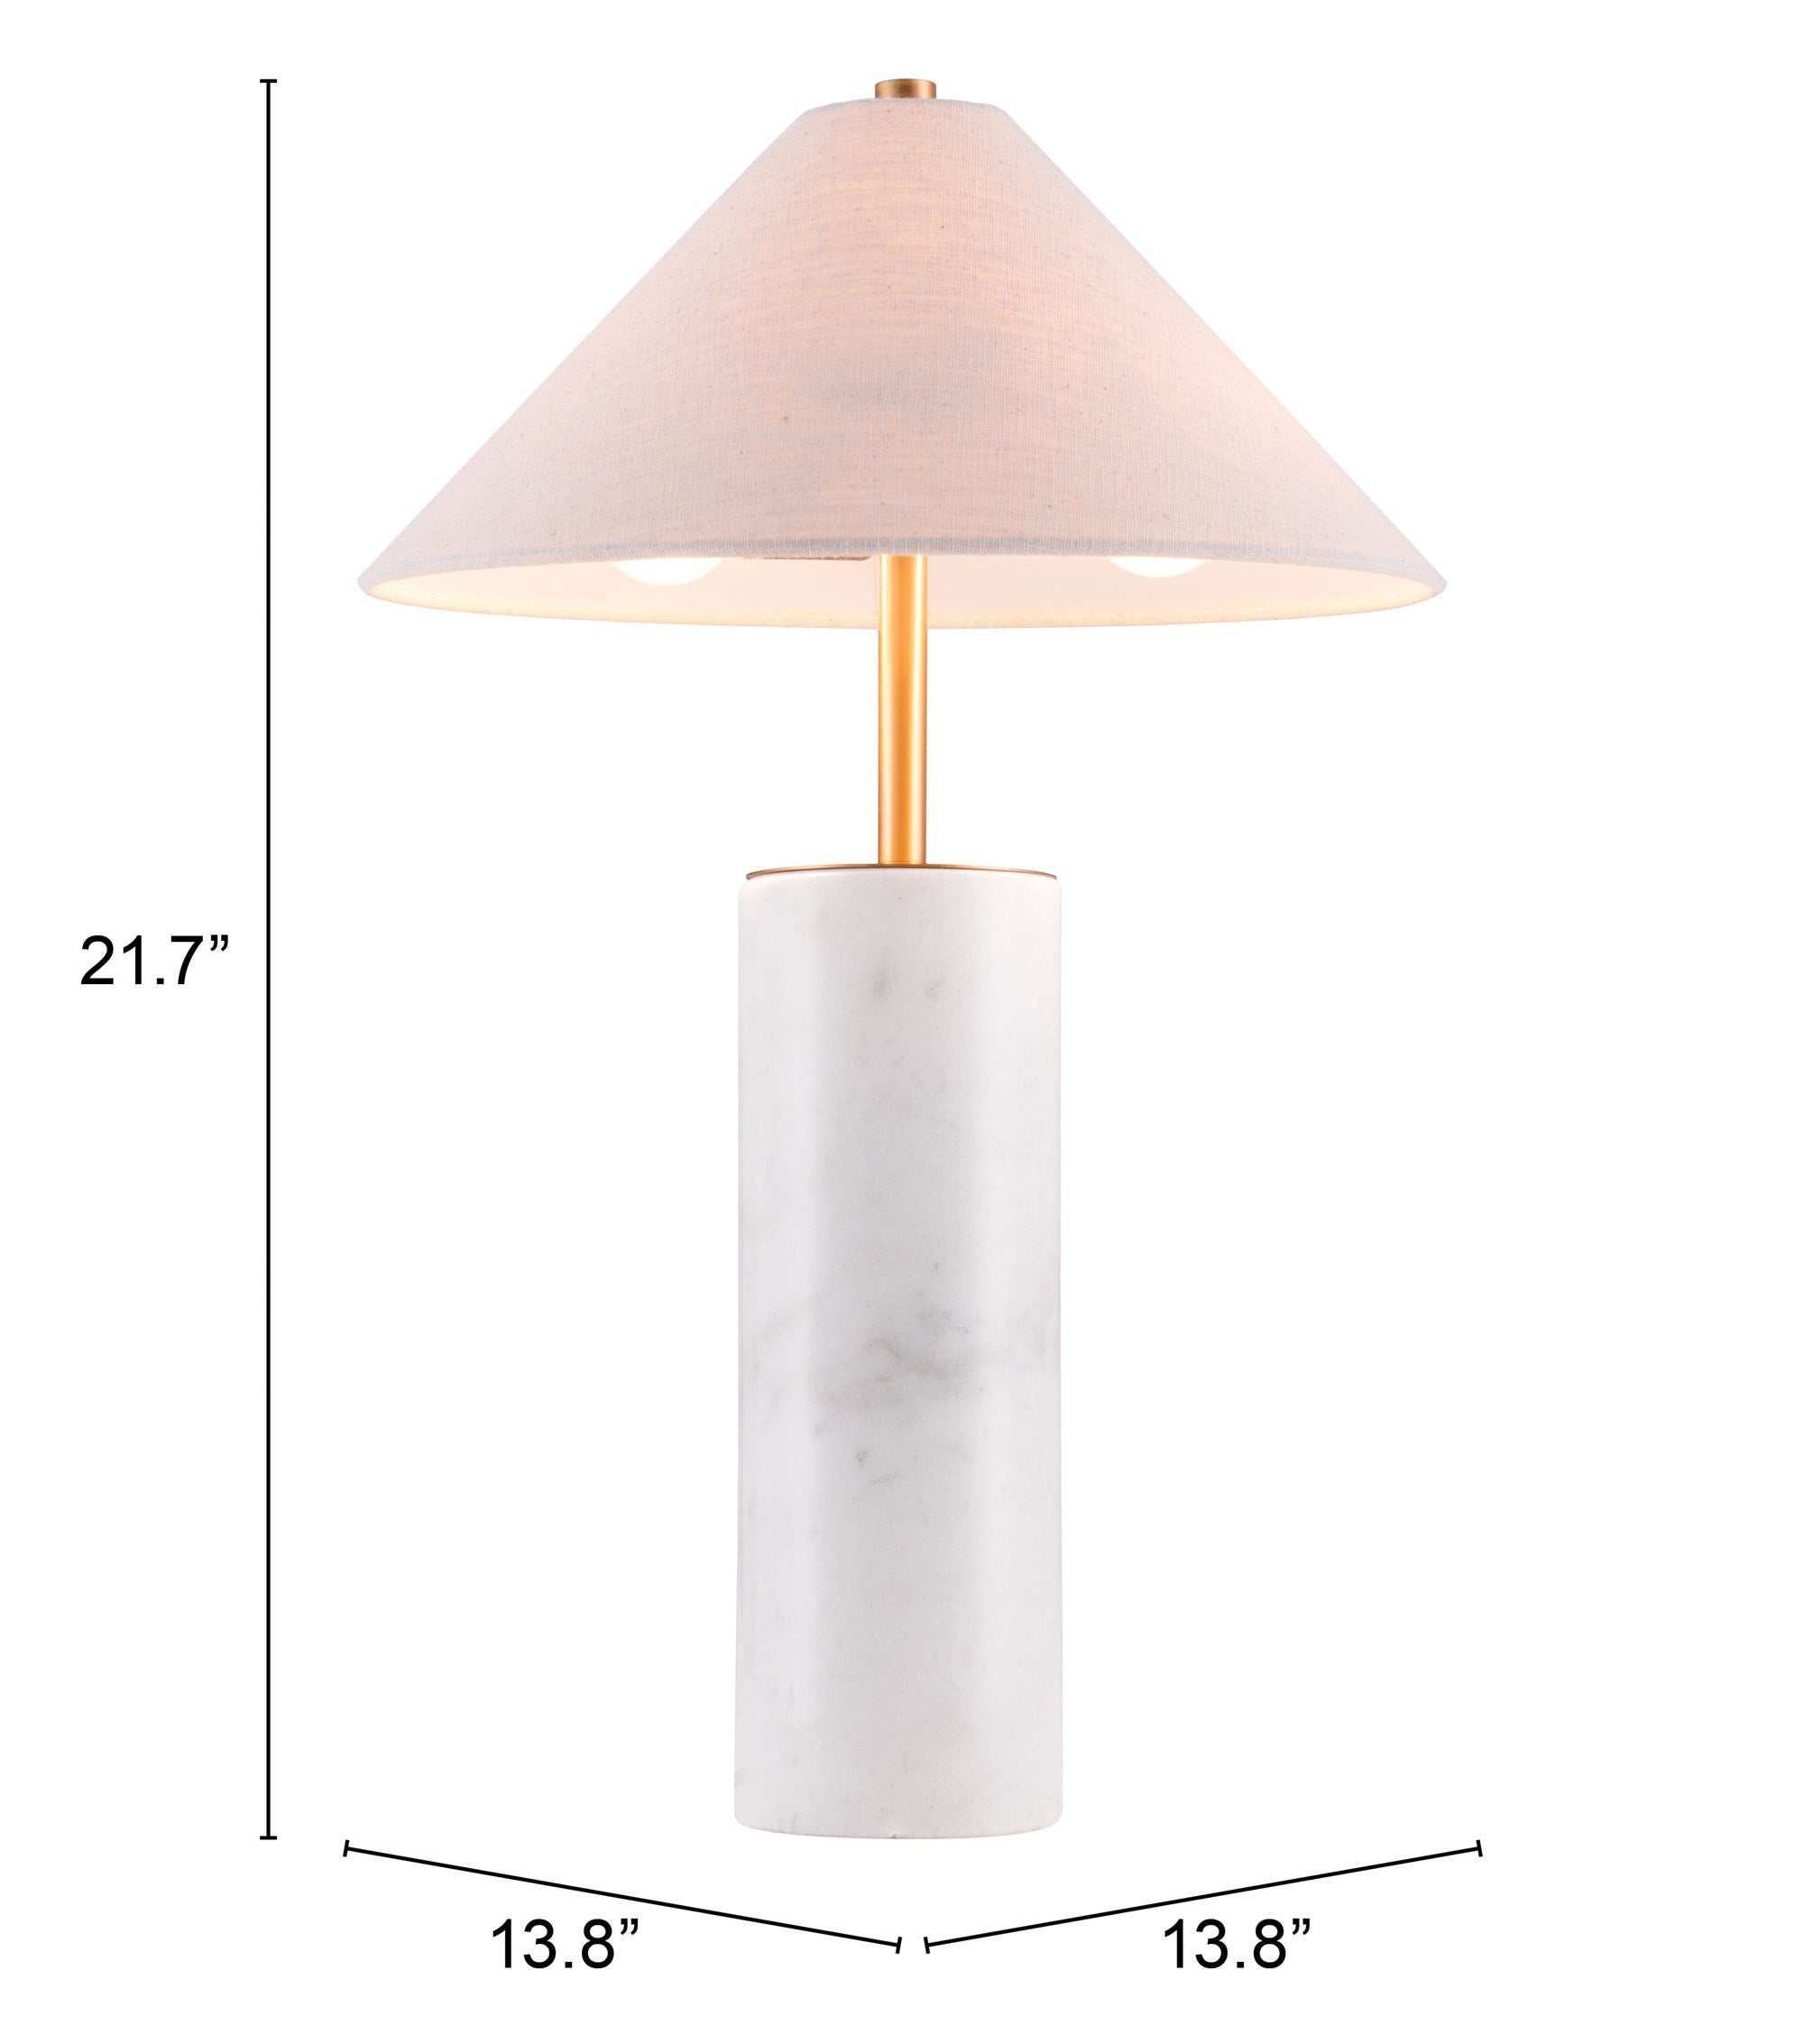 55" White Metal Bedside Table Lamp With Beige Empire Shade